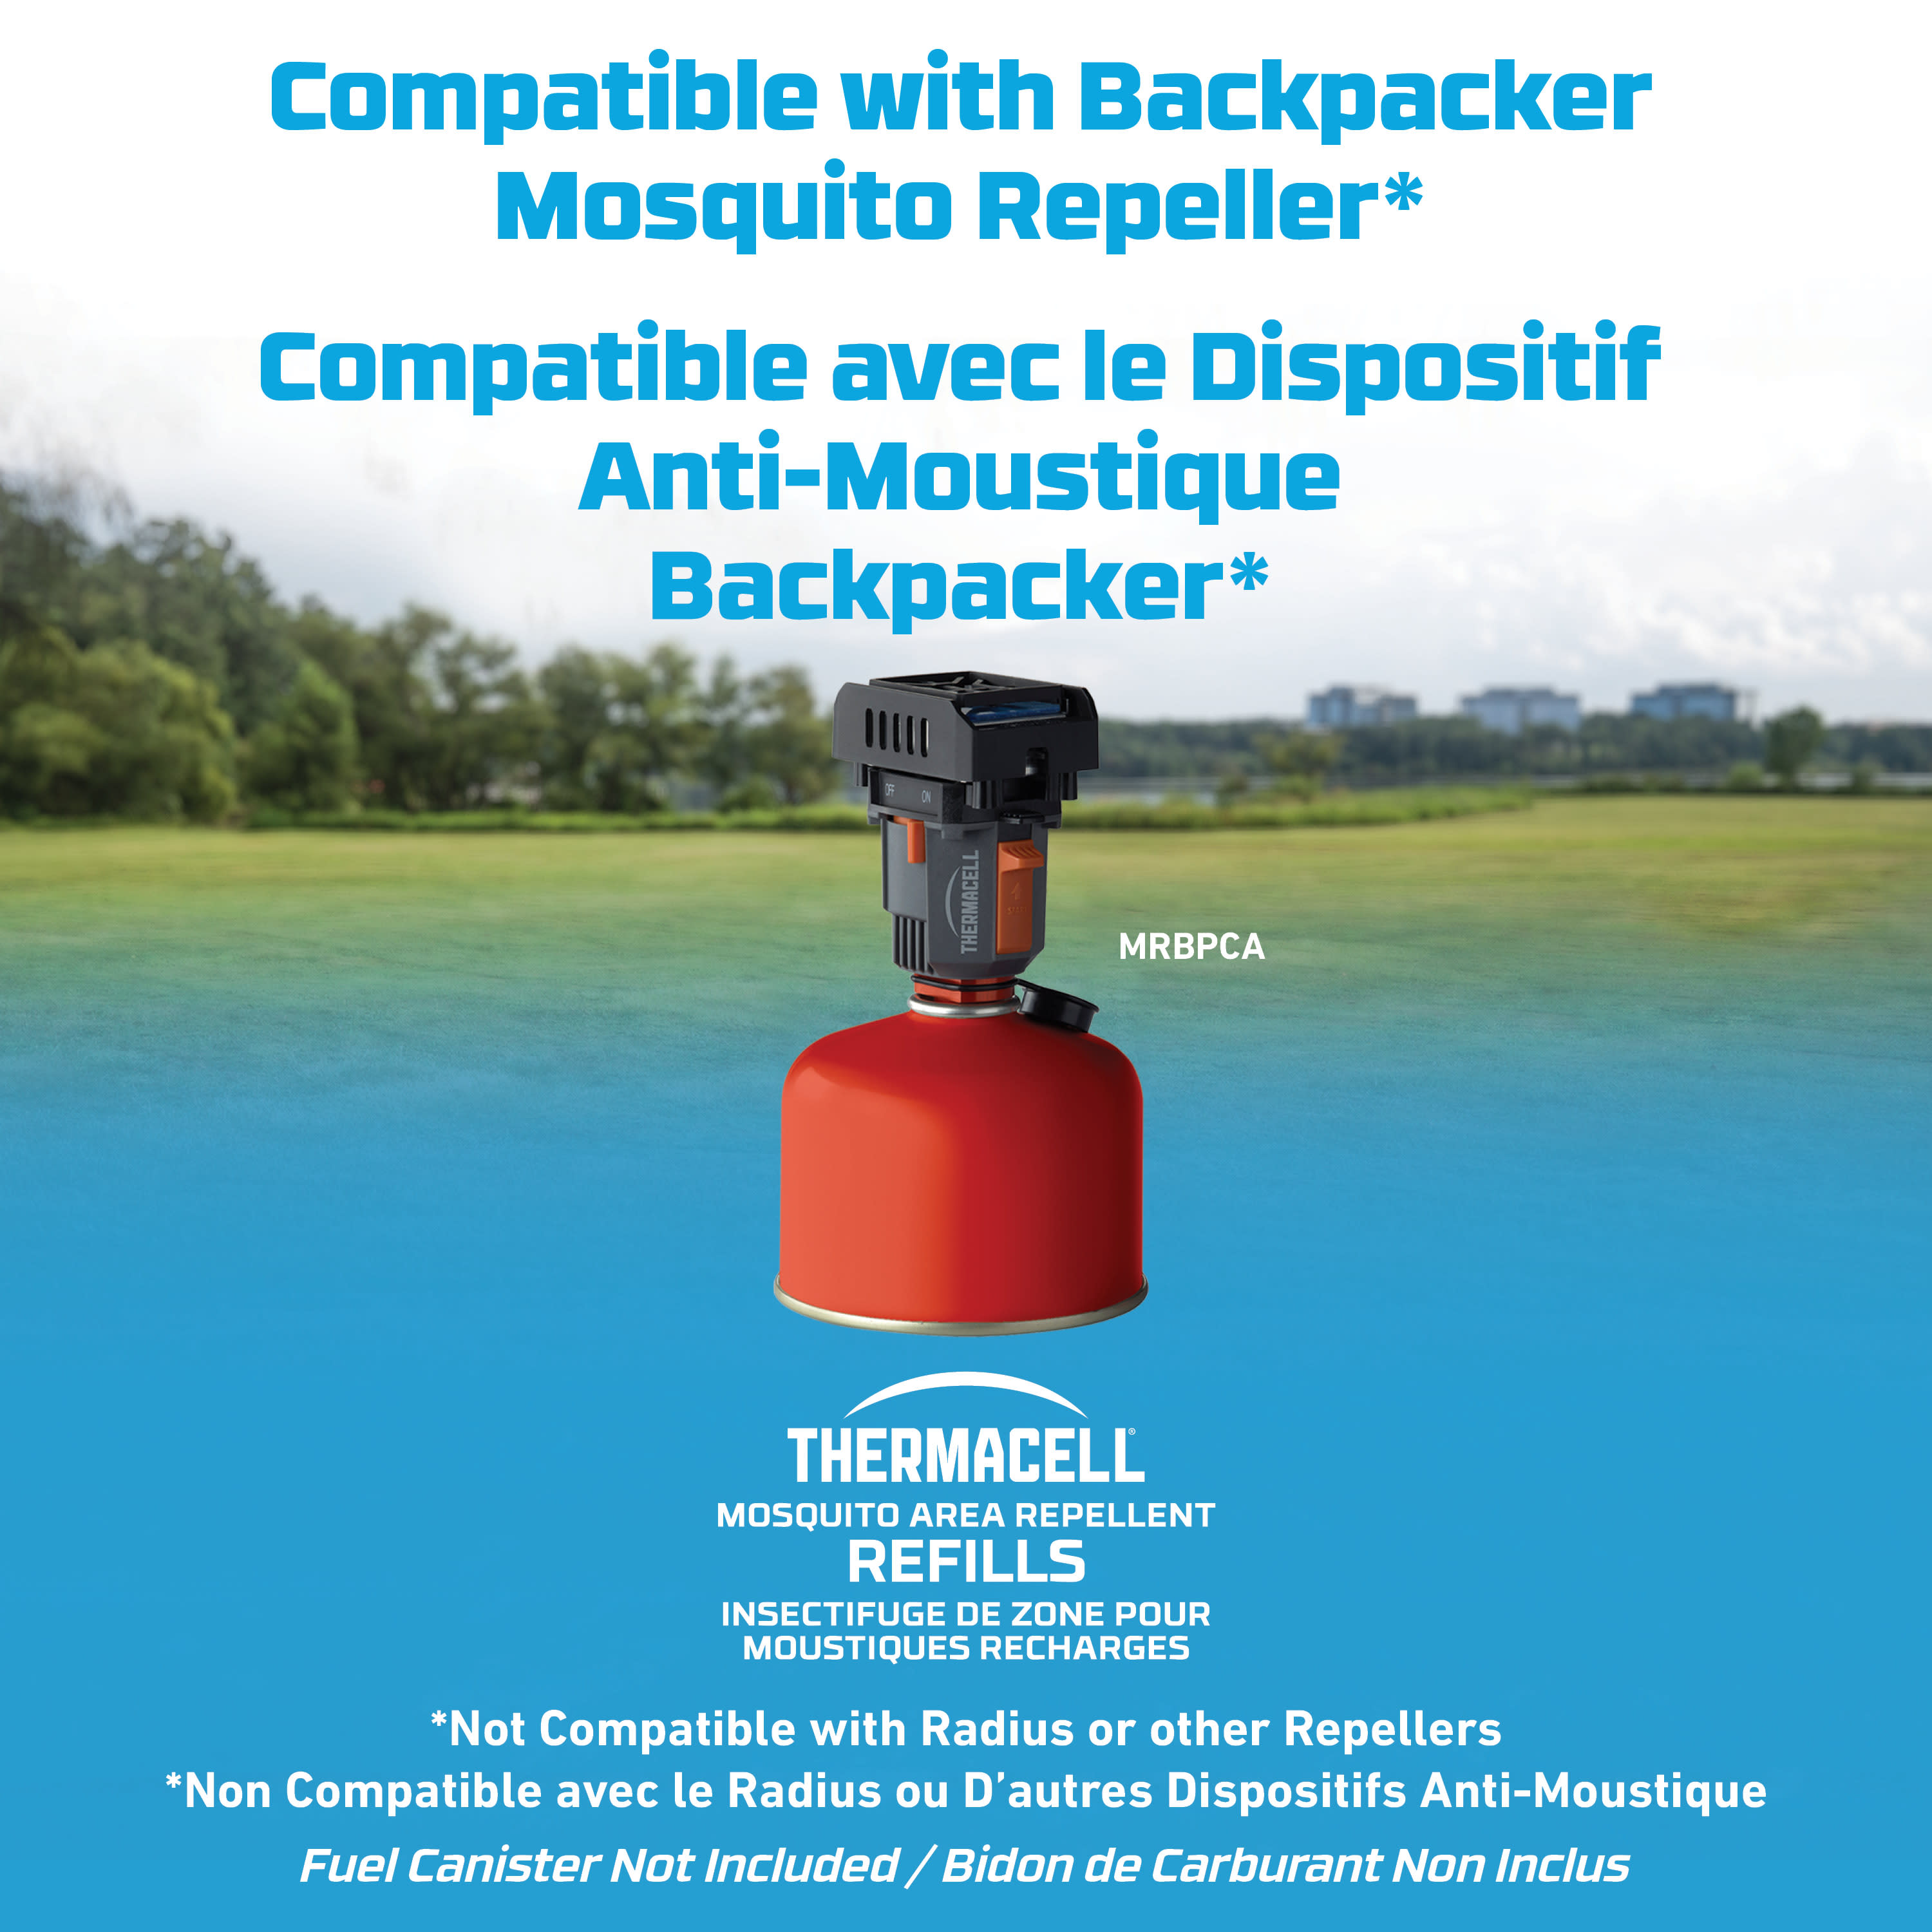 ThermaCELL® Backpacker Mat-Only Refills - 48 Hours